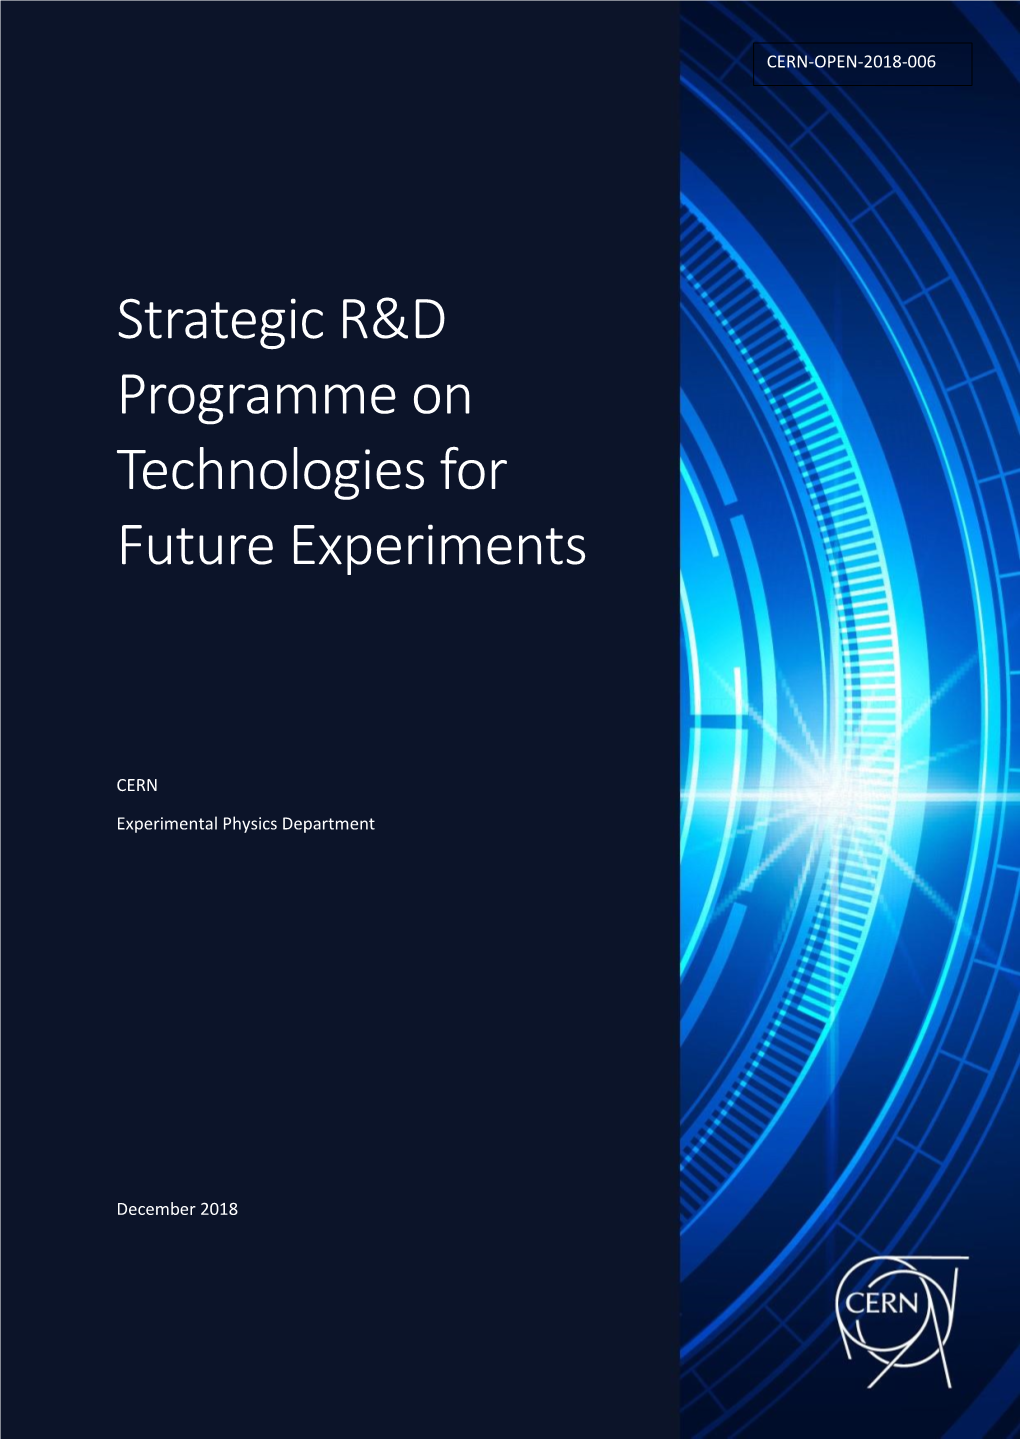 Strategic R&D Programme on Technologies for Future Experiments